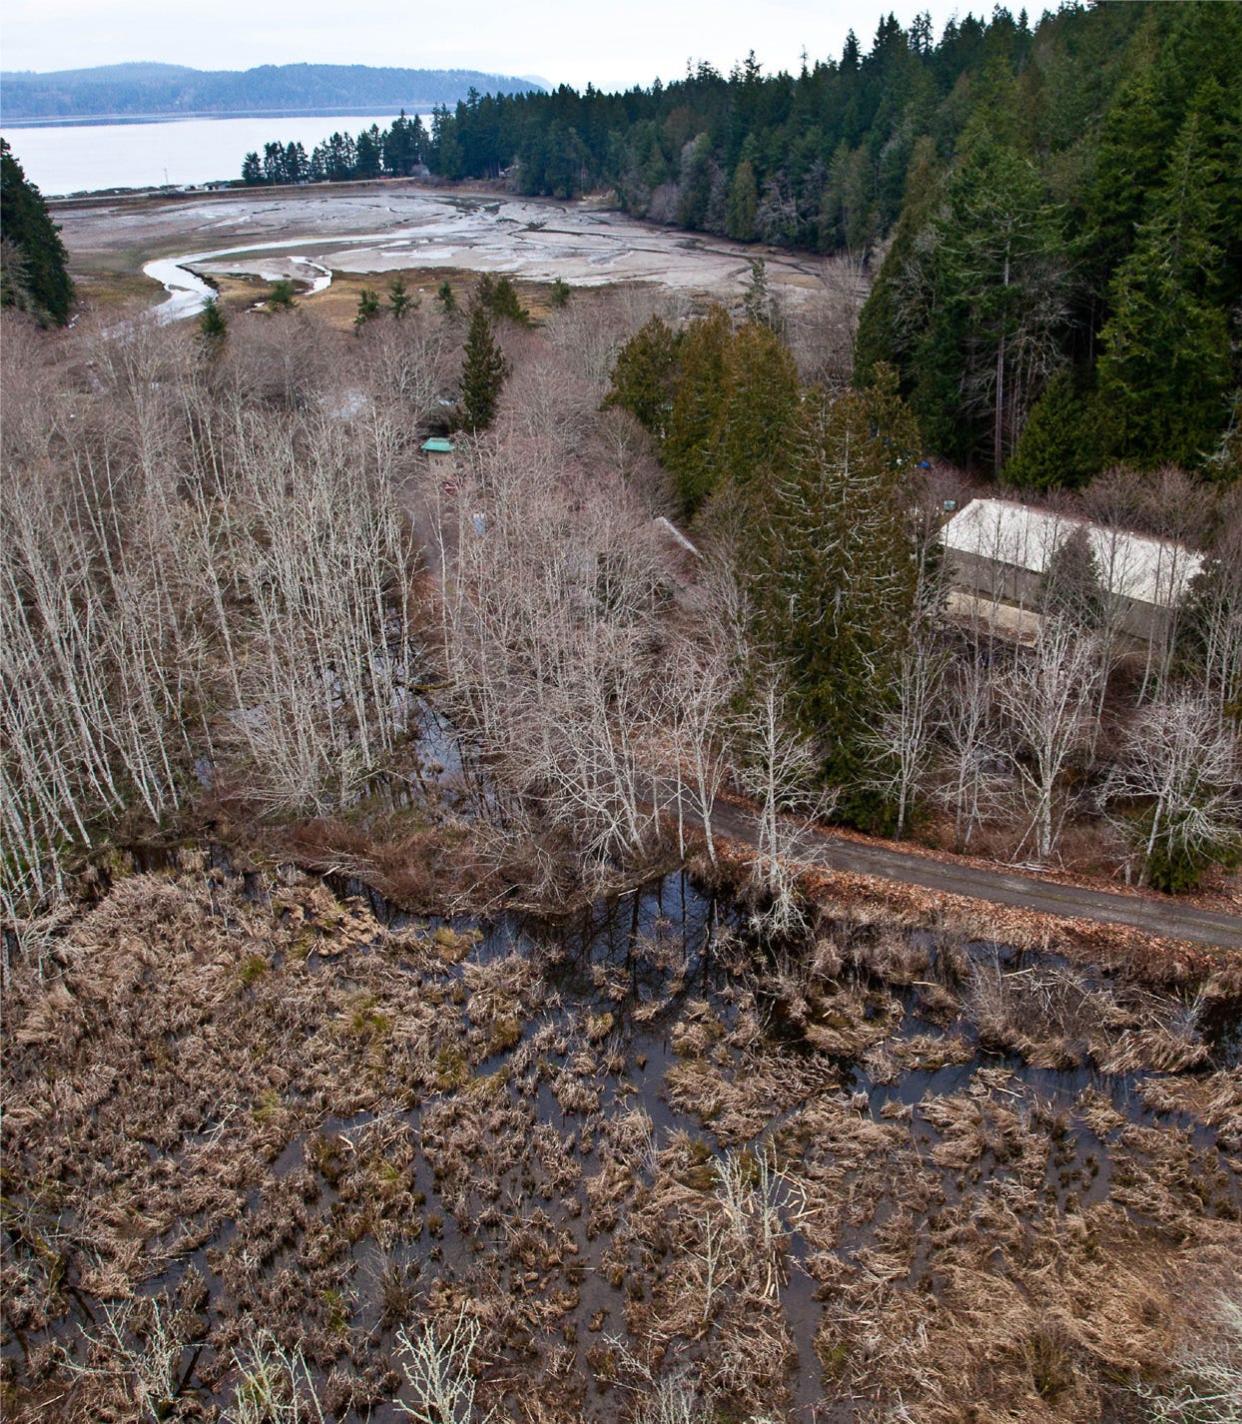 Hood Canal Salmon Enhancement Group has secured the final 50 acres to protect the area.